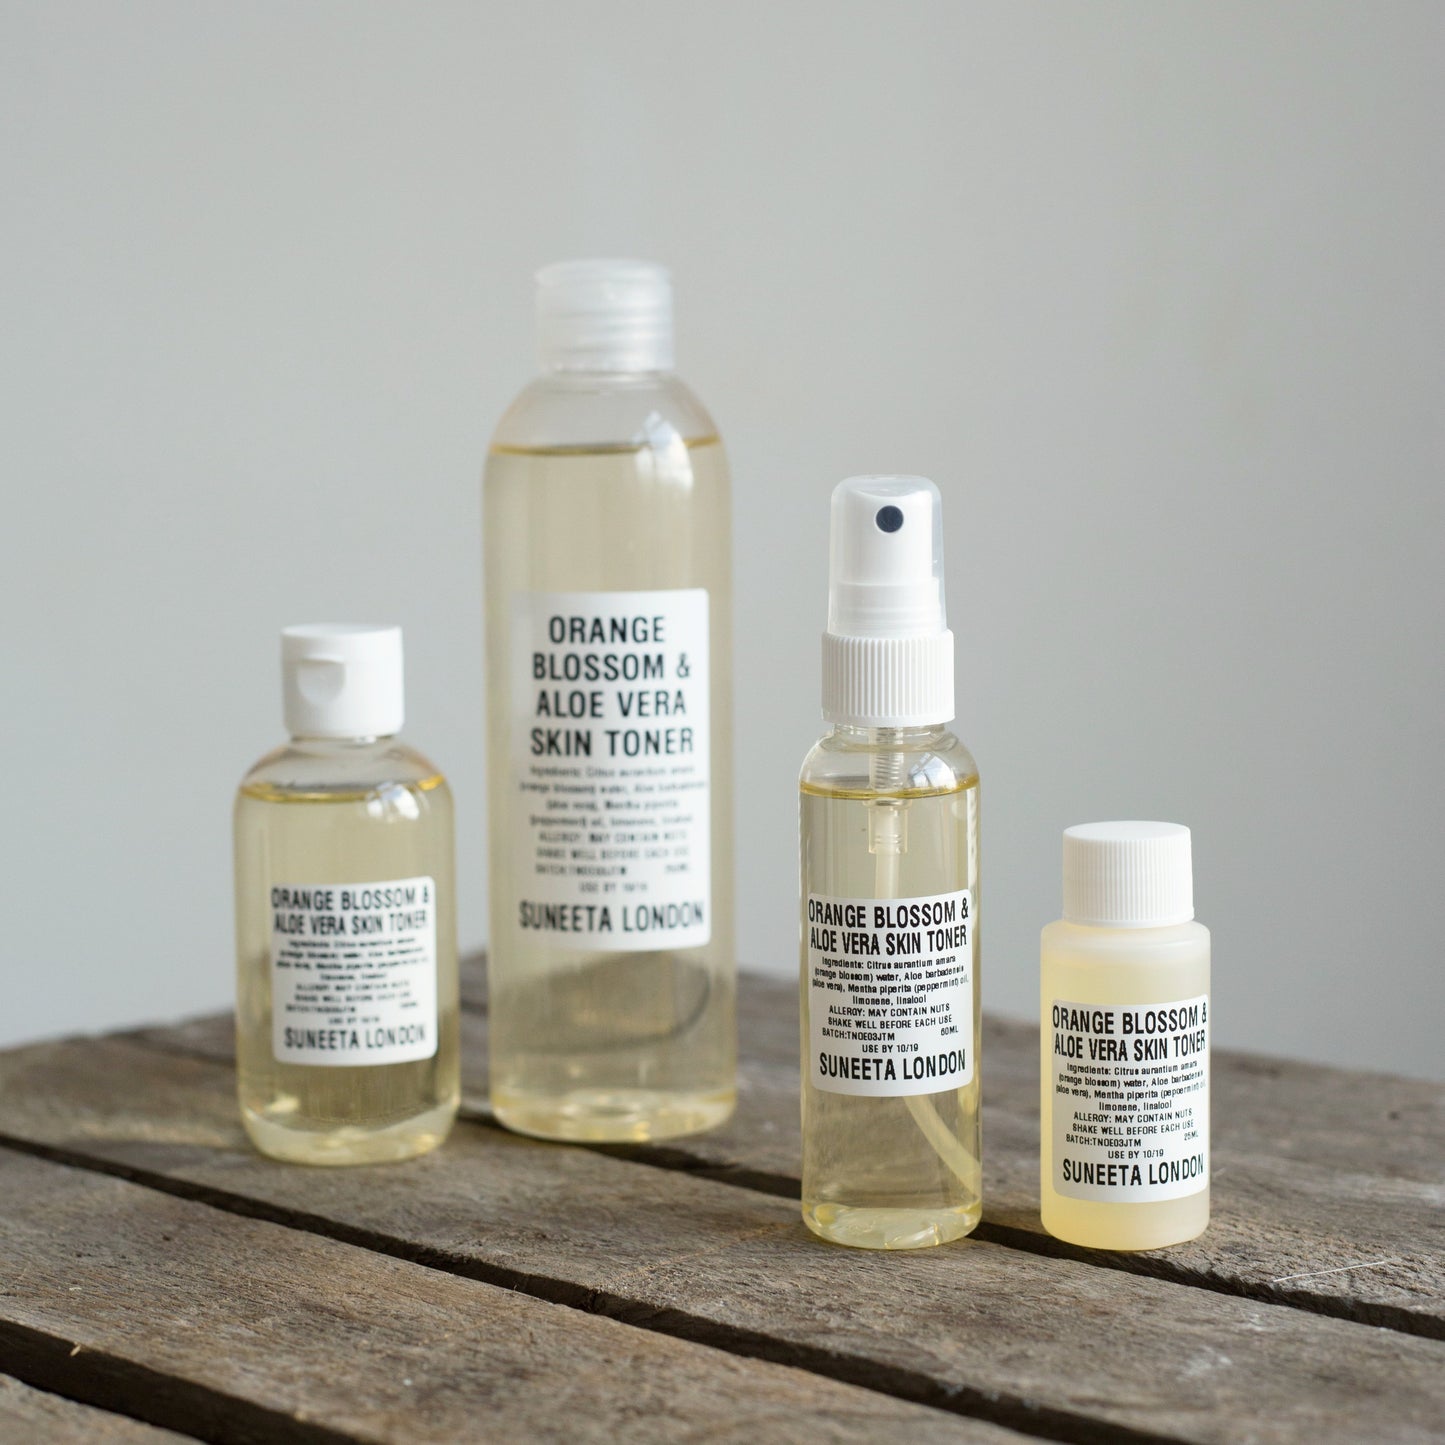 orange blossom aloe vera skin toner in various sizes, by suneeta London x weigh and pay